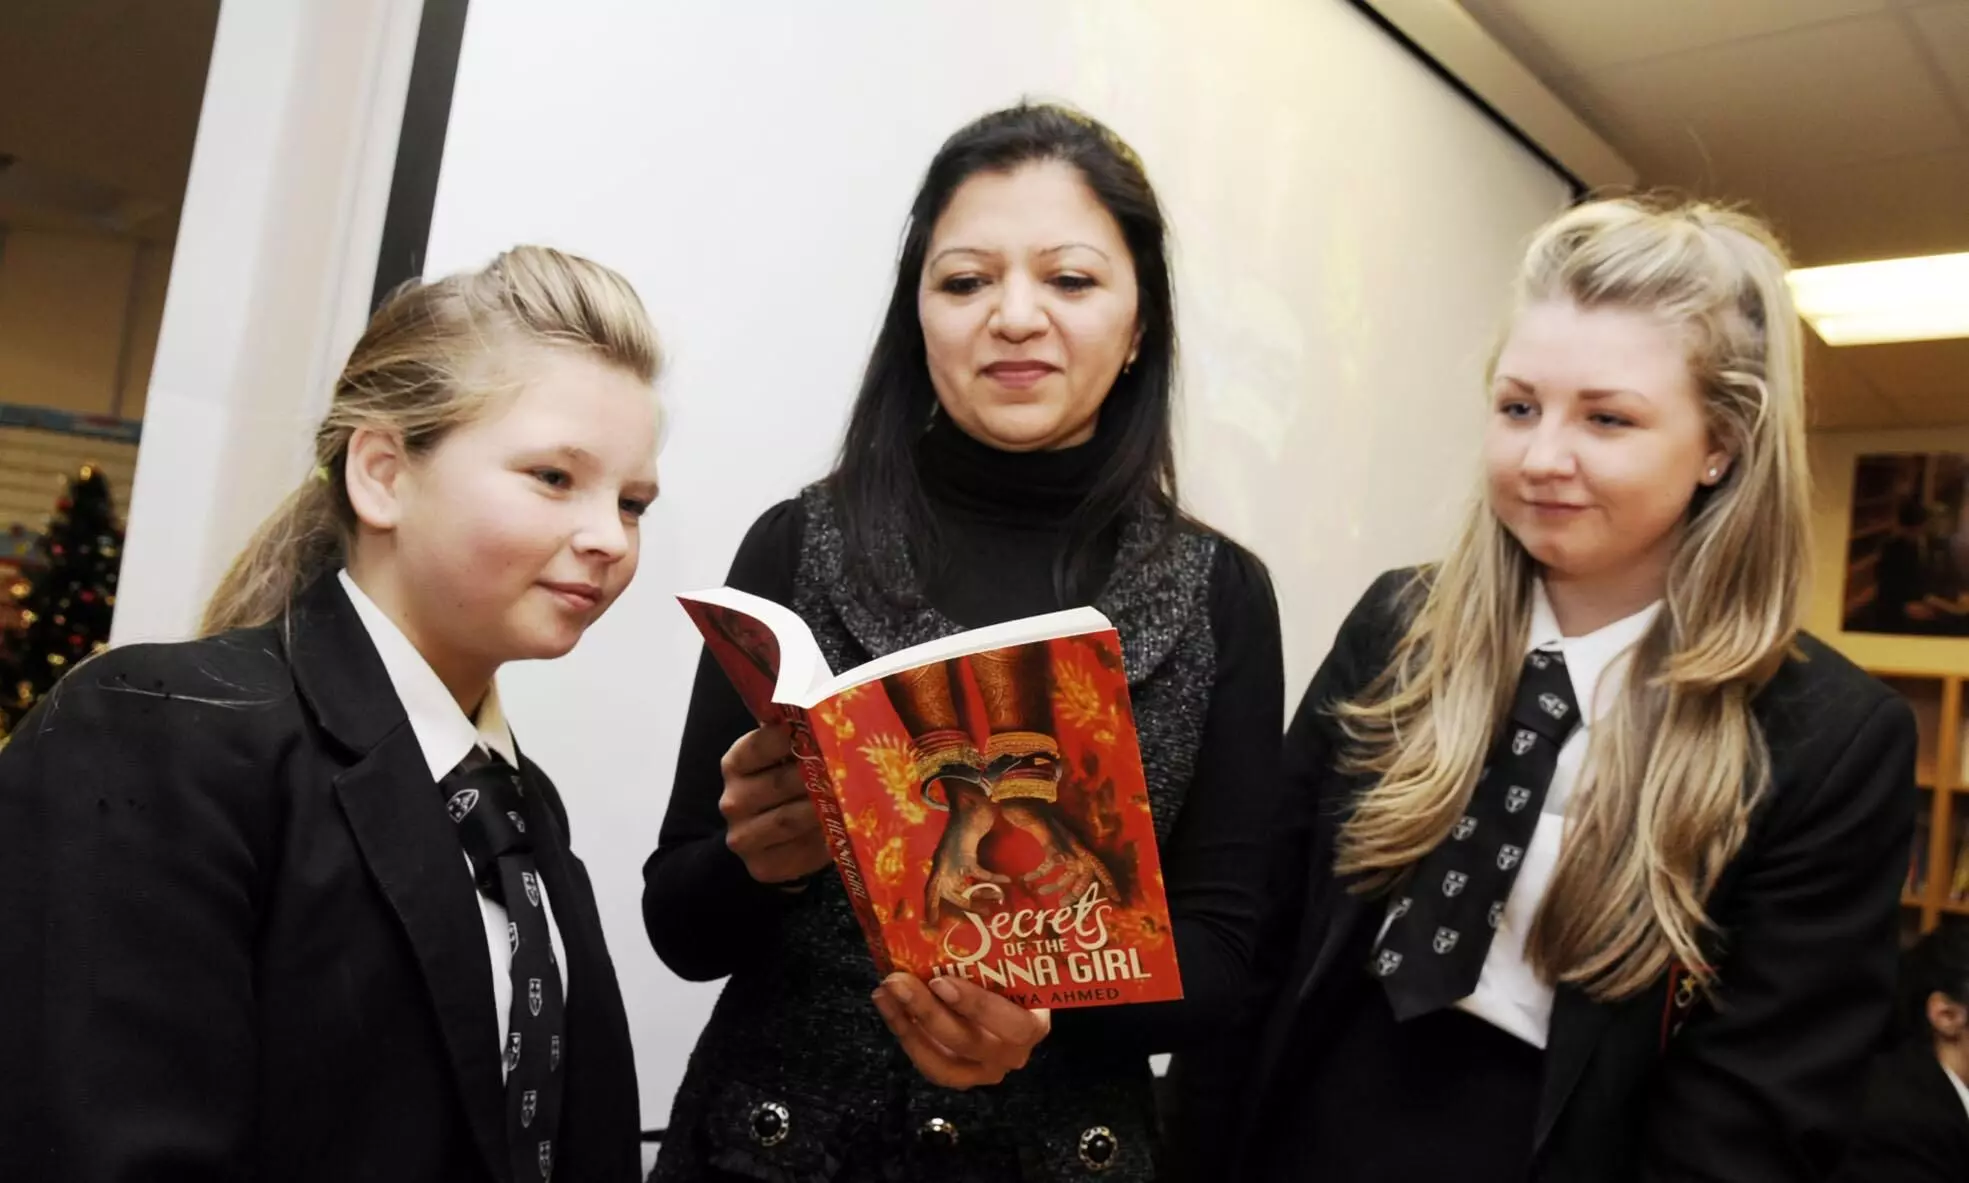 Indo-British author re-introduces Enid Blytons characters